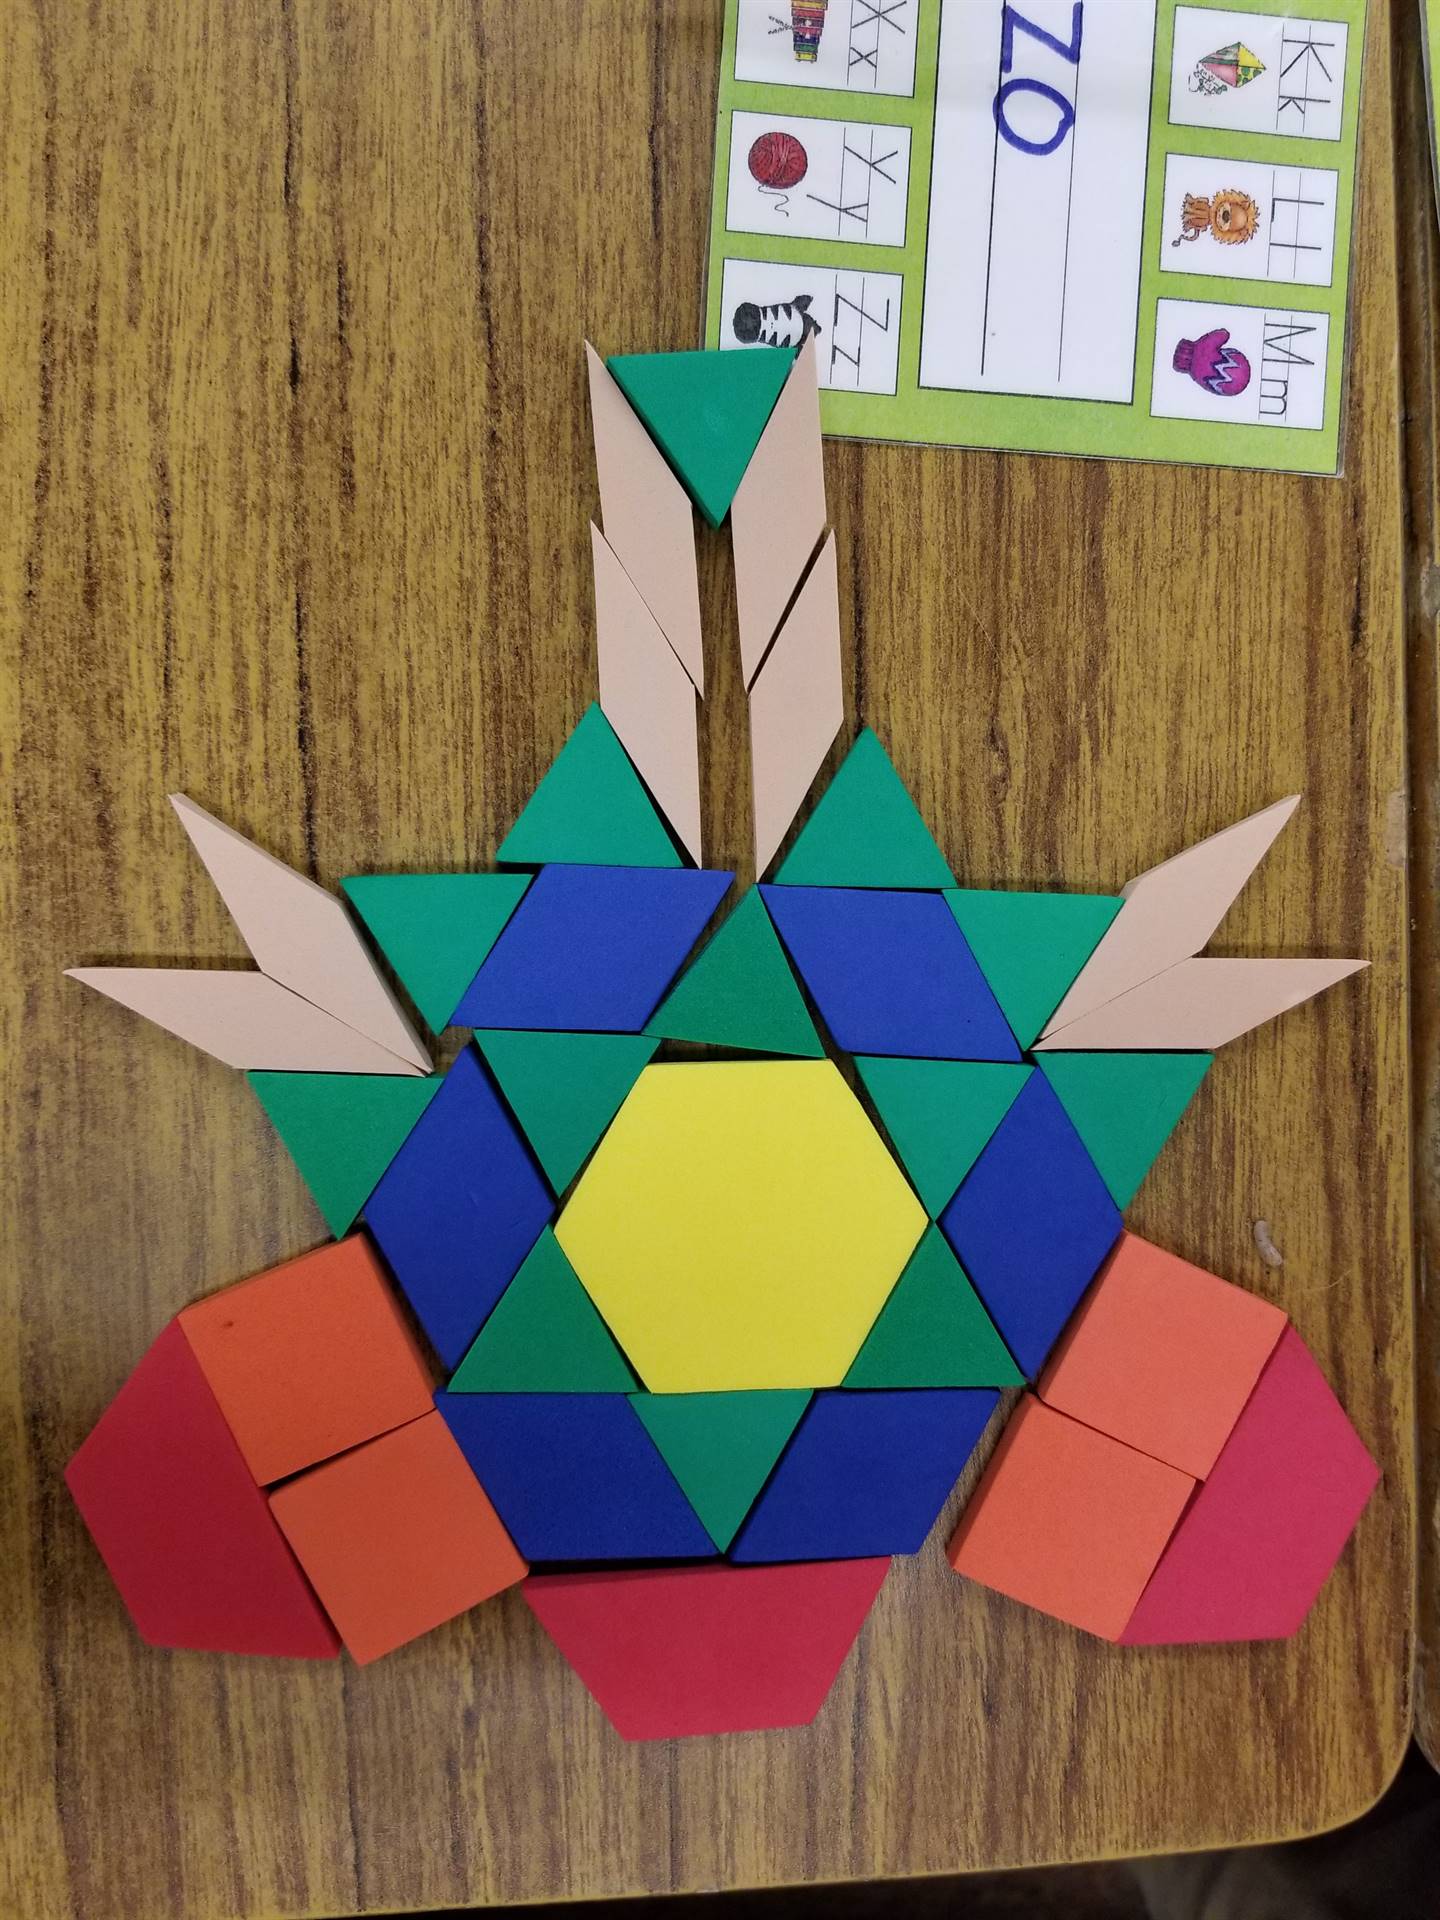 first grade student's tile math project